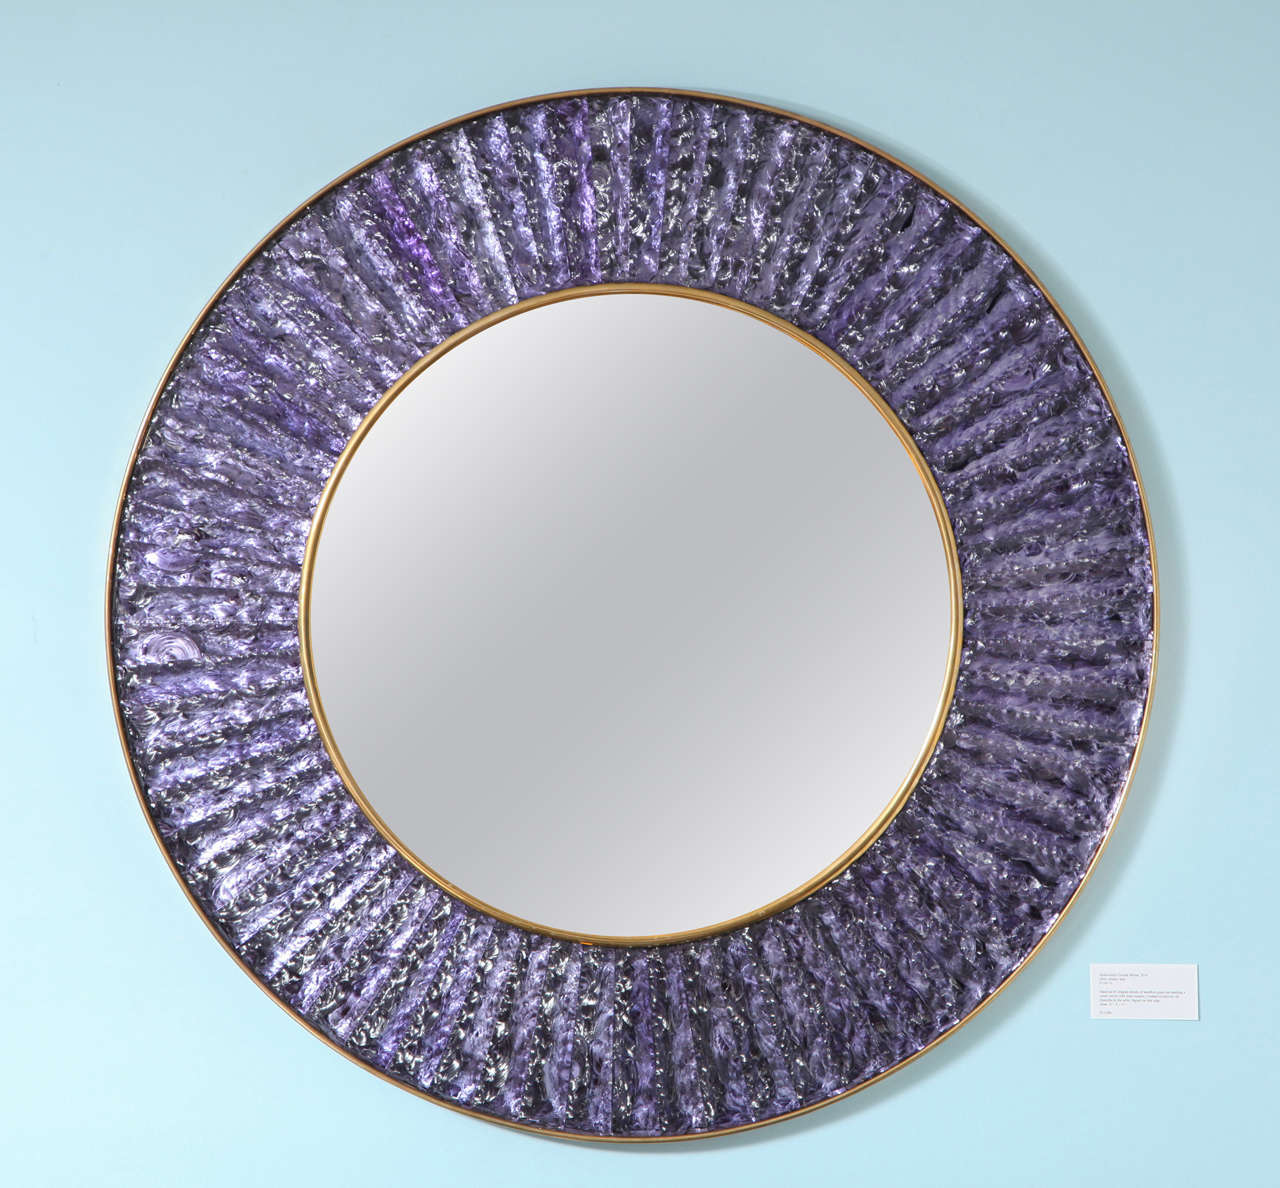 Contemporary wall mirror of hand-cut and chipped chunks of amethyst glass. Arranged in a circle around a central mirror with brass mounts. Beautiful studio made piece created exclusively for Donzella. Signed on side edge.